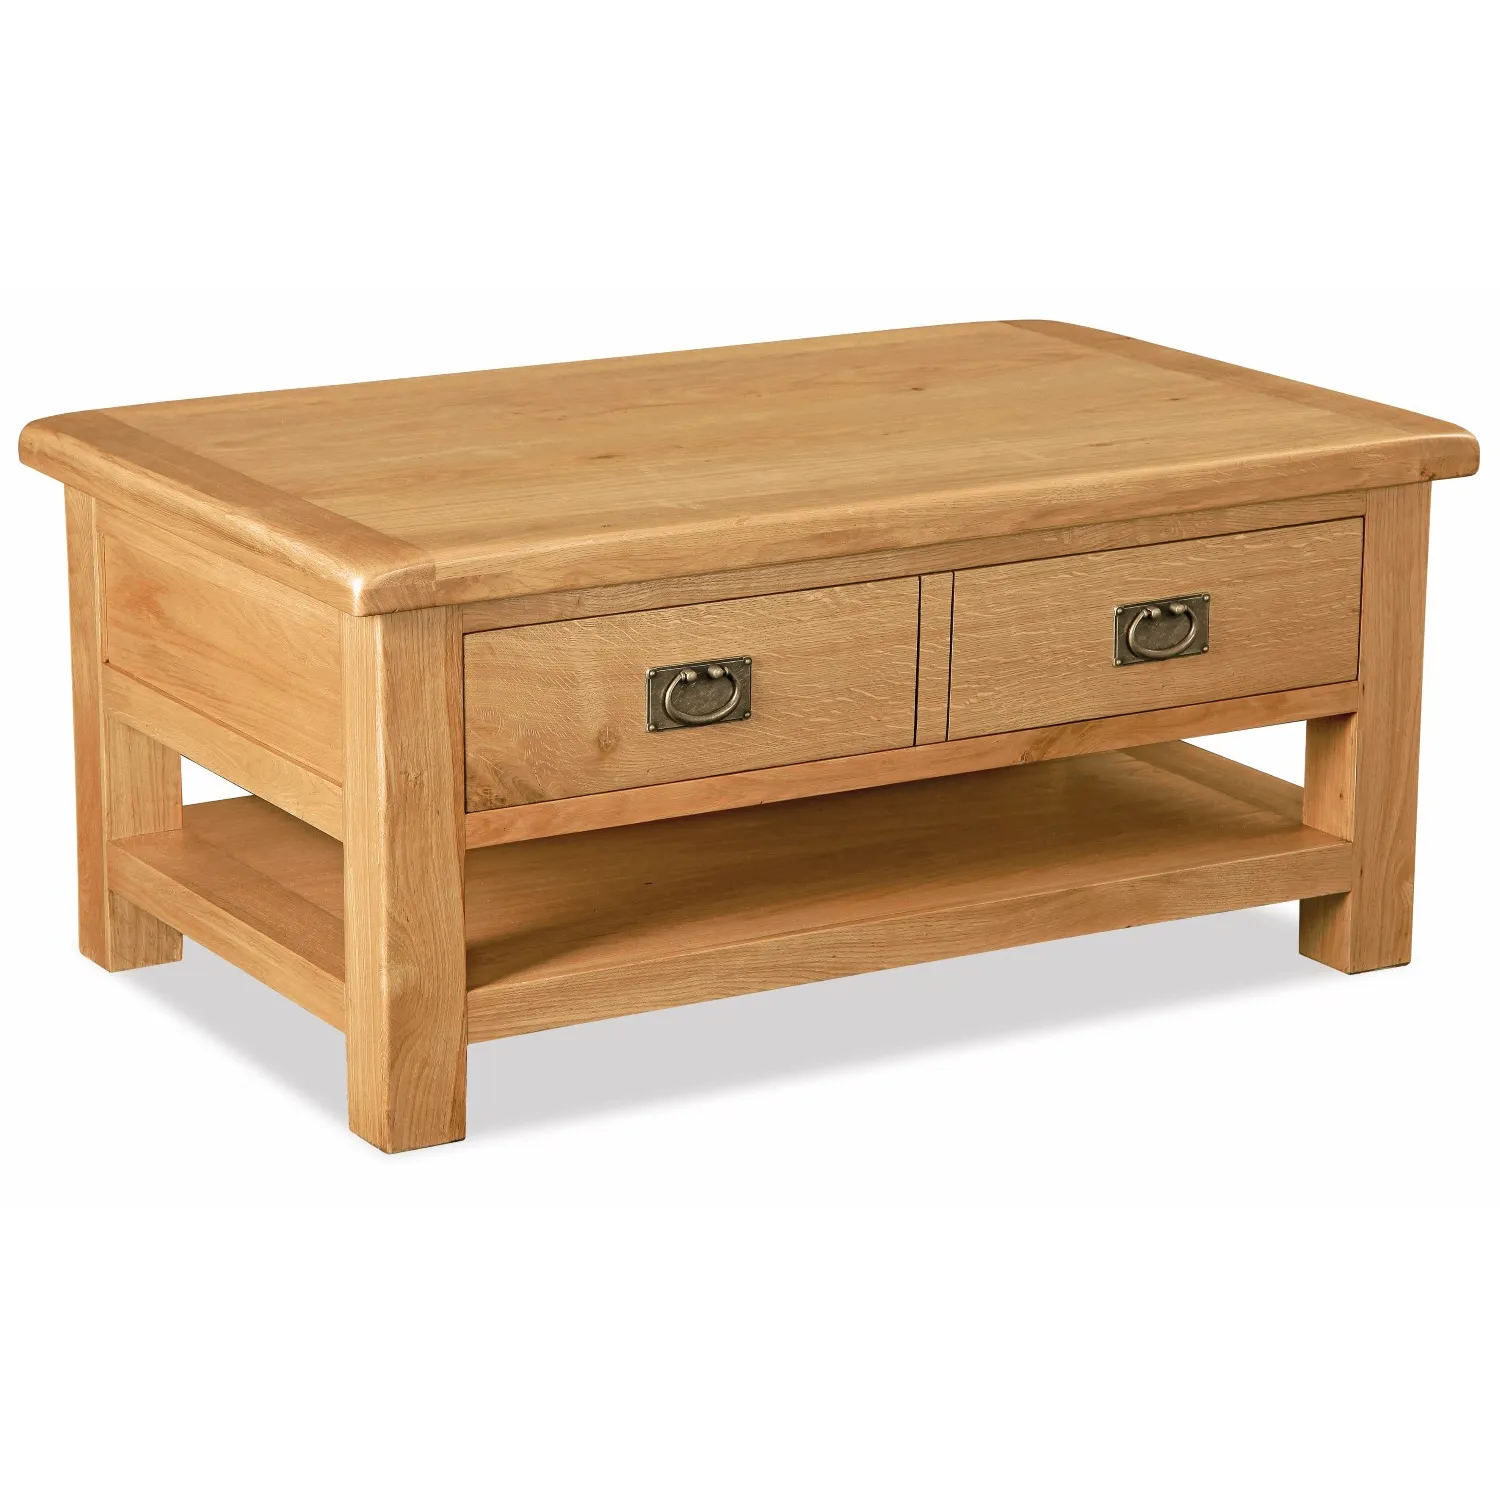 Rustic Solid Oak Coffee Table with Drawer and Shelf